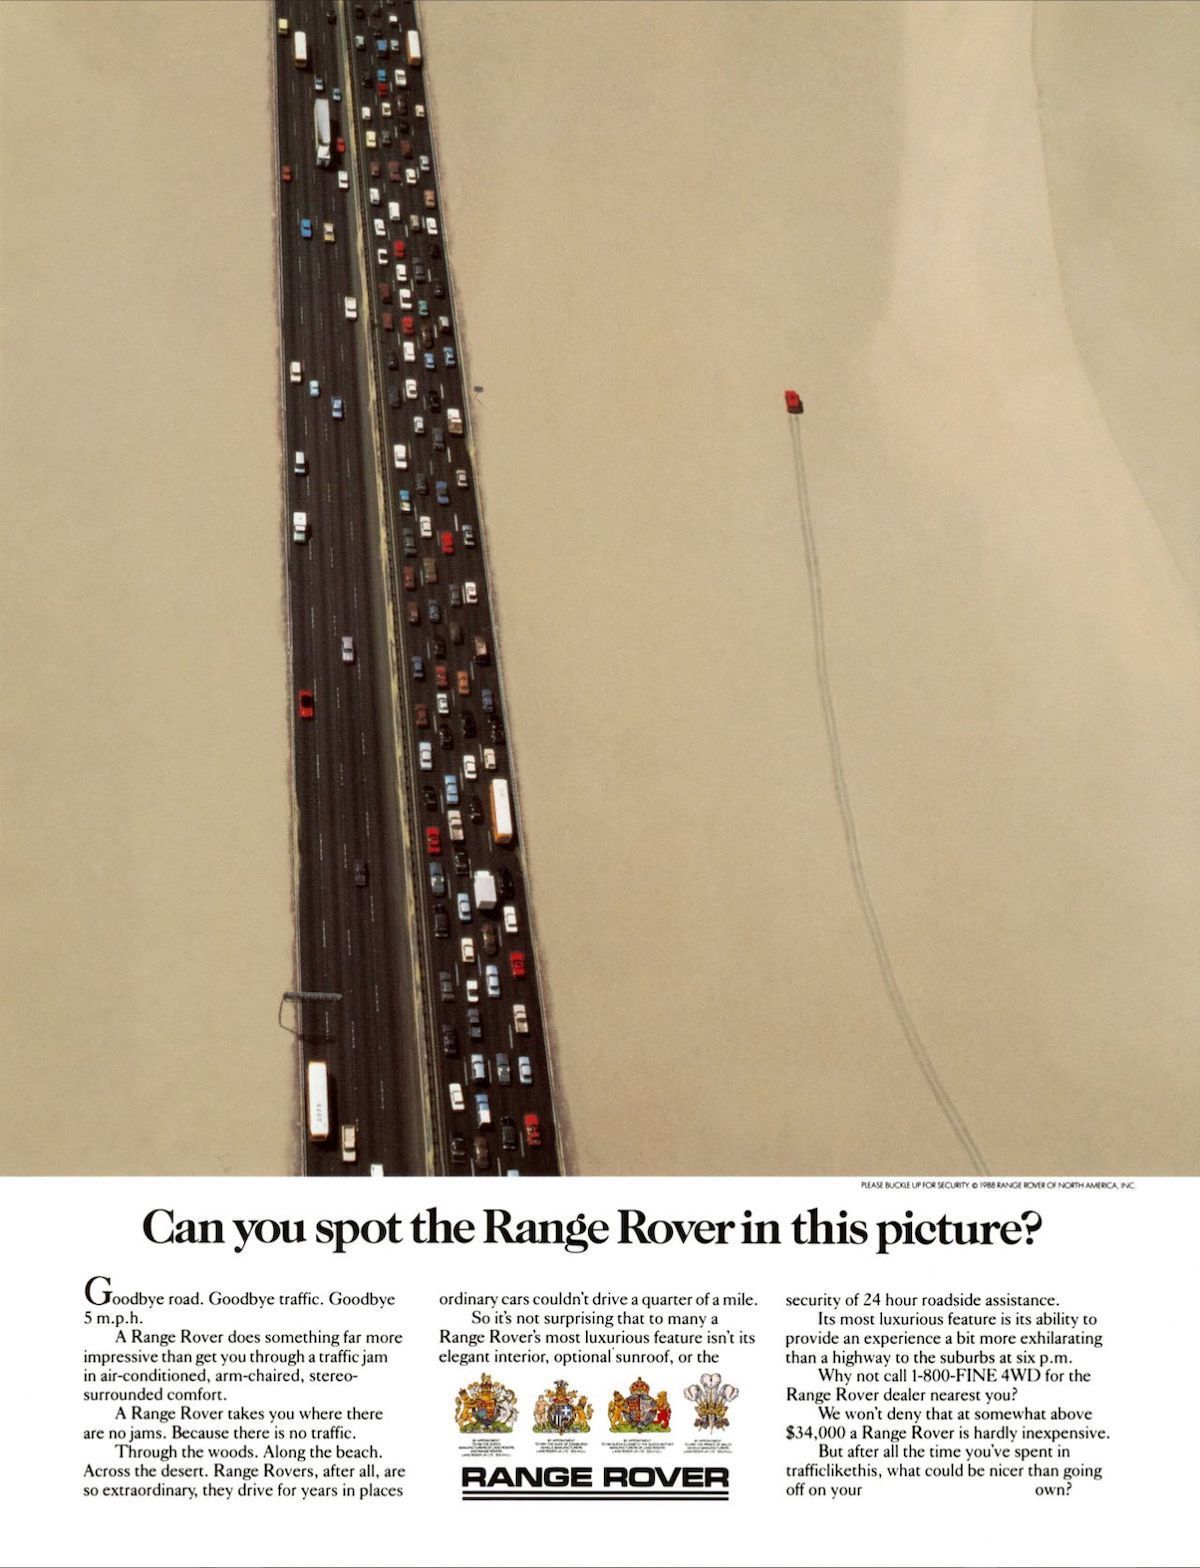 Creative Ads: Can you spot the Range Rover in this picture?